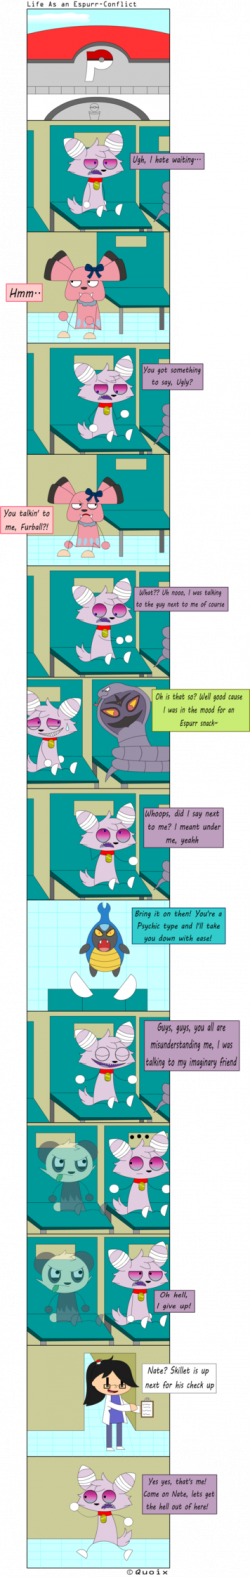 Life as an Espurr-Conflict by Quoix on DeviantArt